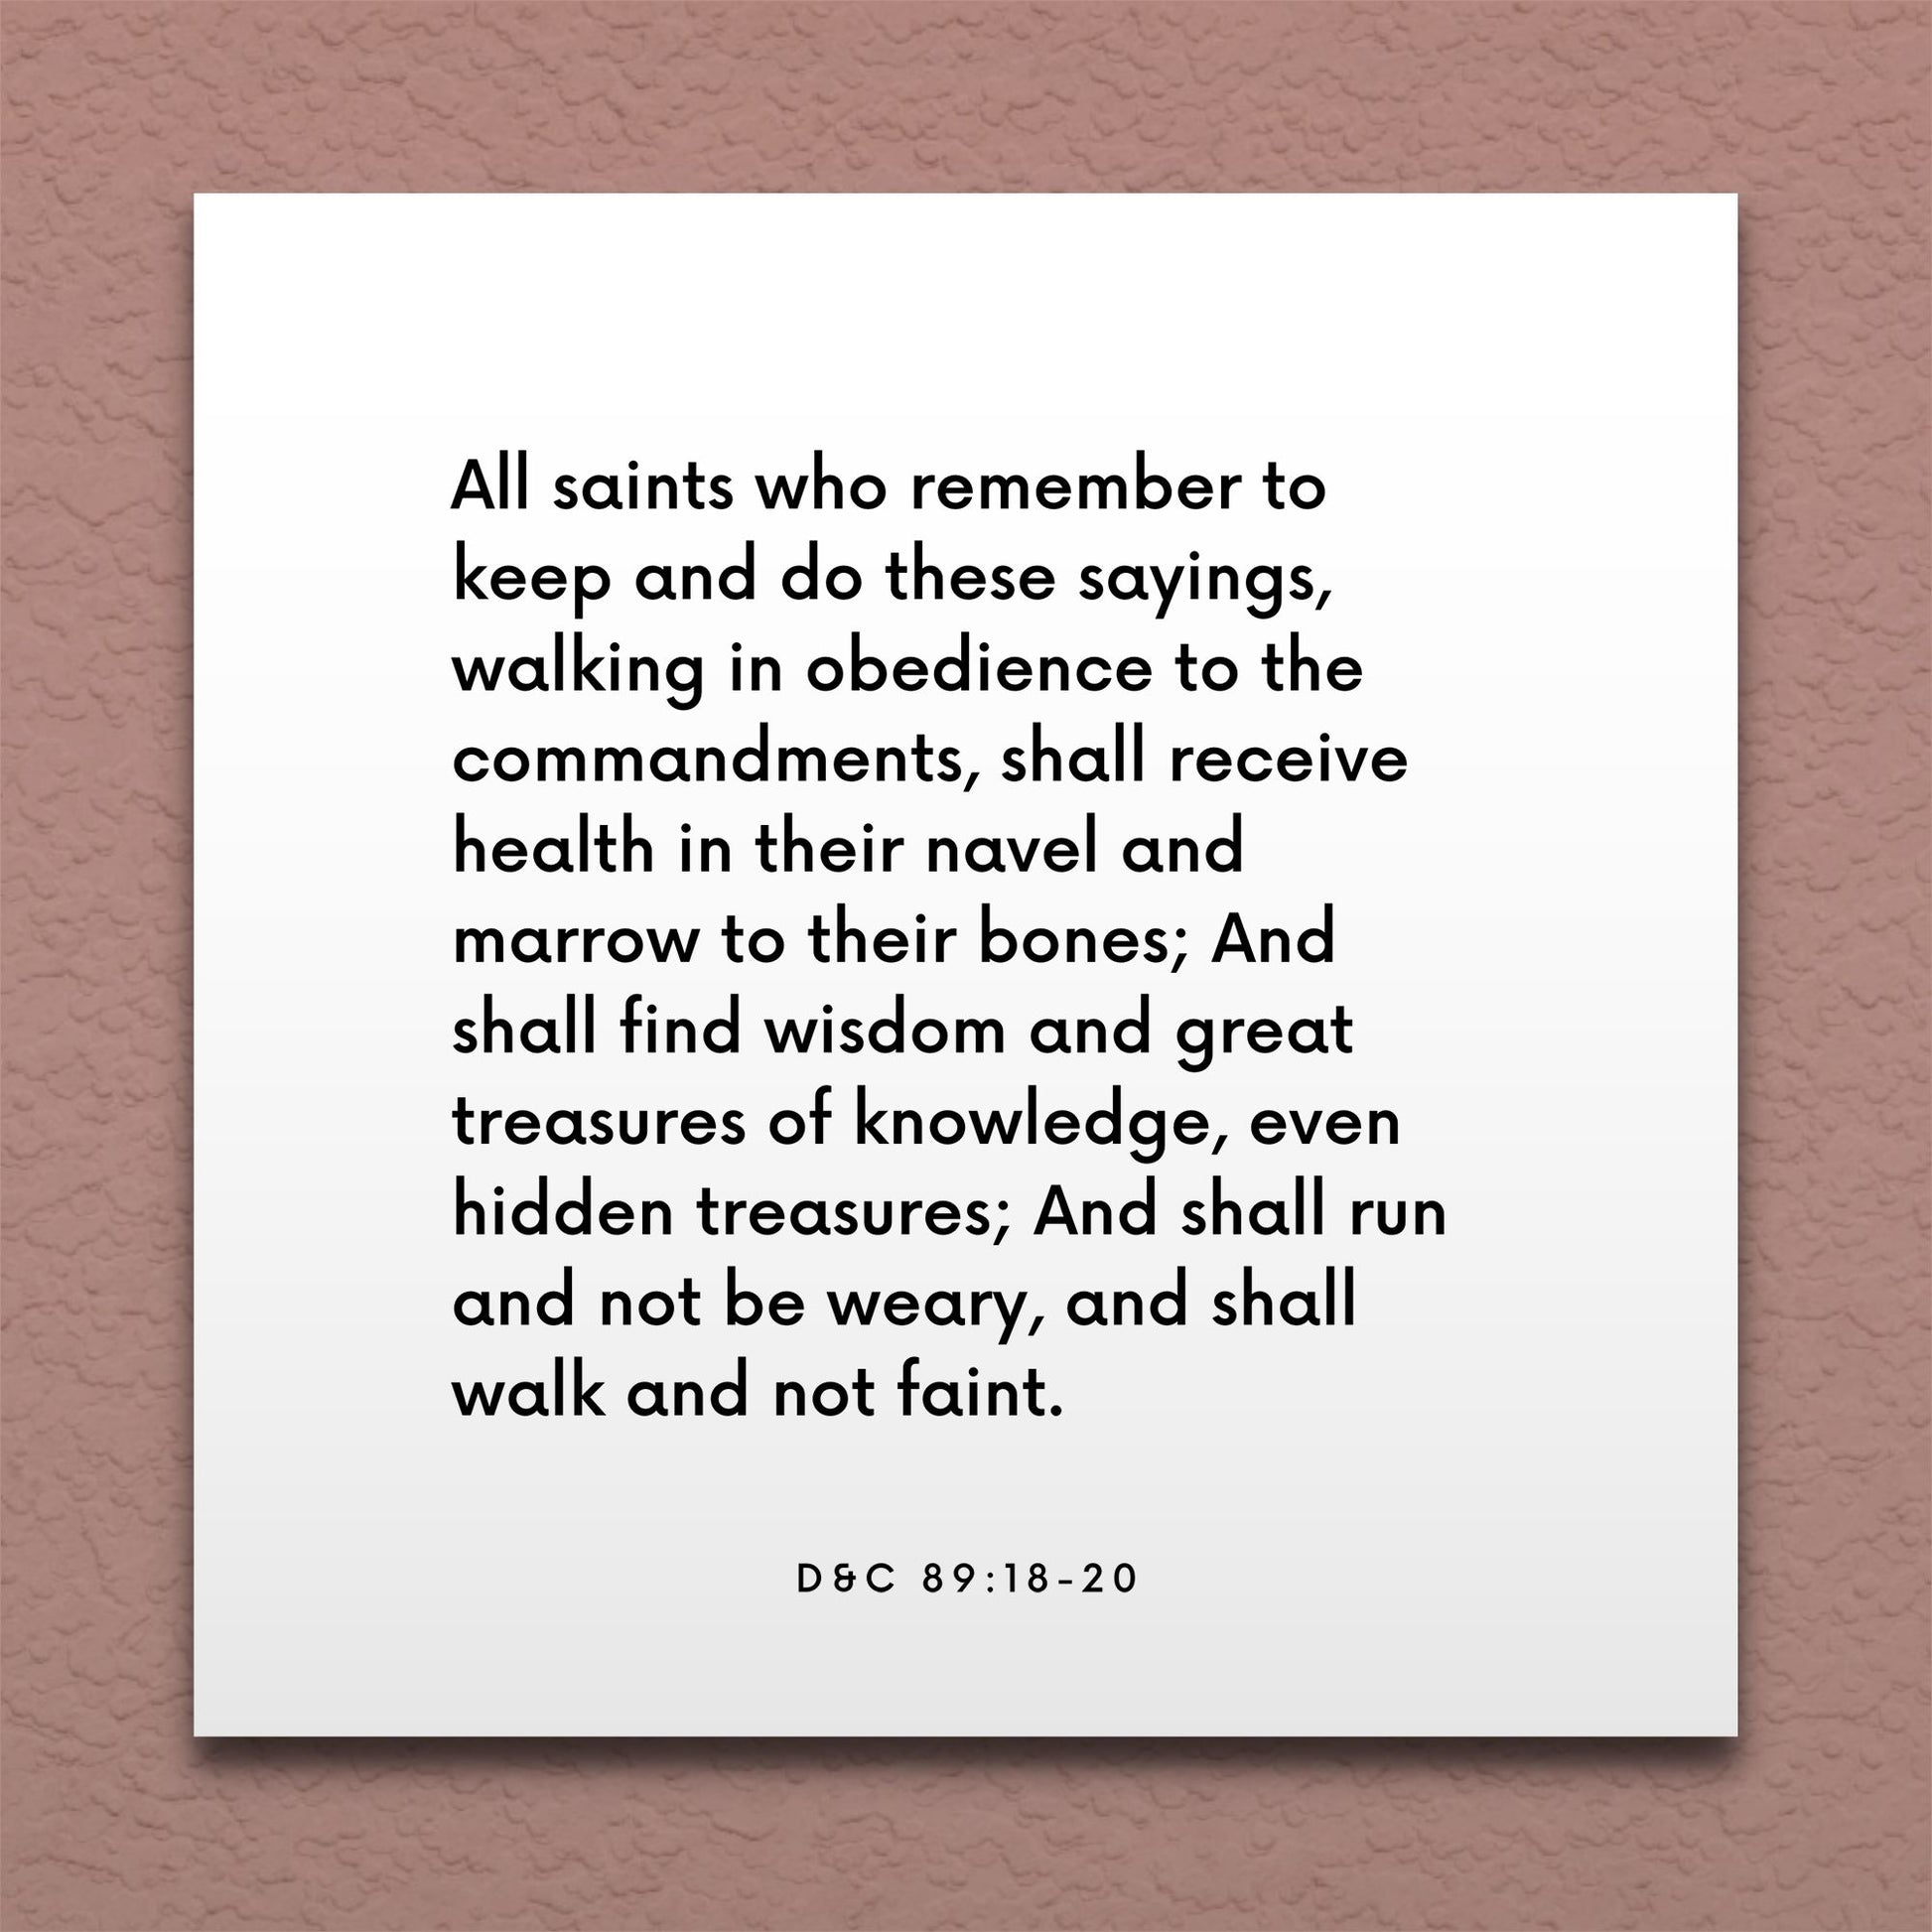 Wall-mounted scripture tile for D&C 89:18-20 - "All saints who remember to keep and do these sayings"